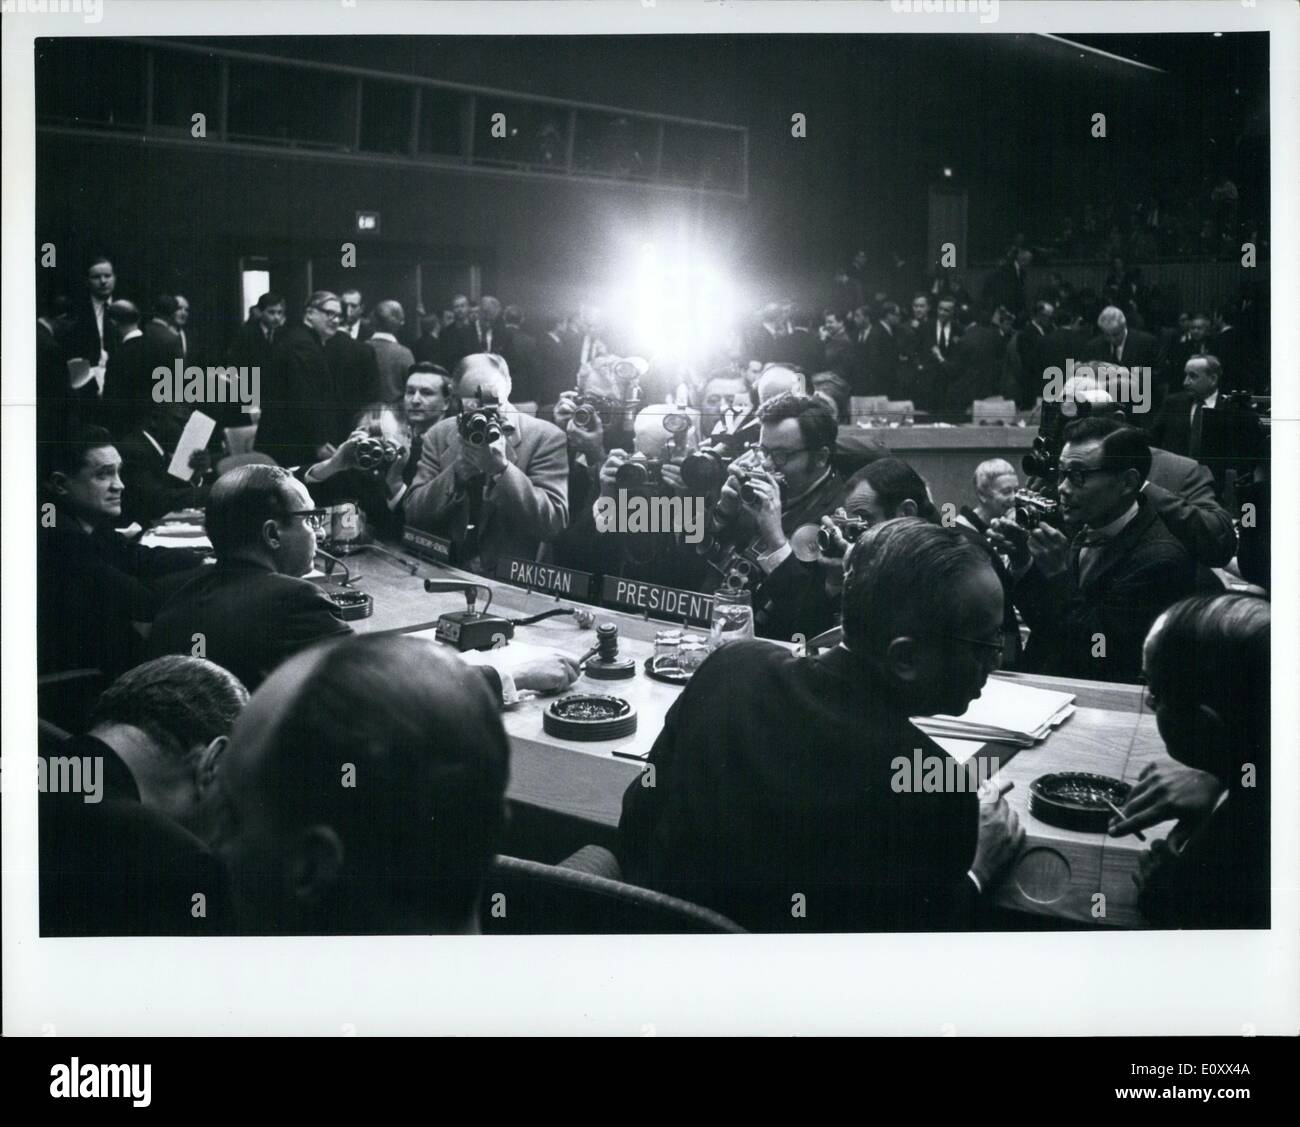 Jan. 01, 1968 - SECURITY COUNCIL BEGINS CONSIDERATION OF COMPLAINT BY THE UNITED STATES AGAINST NORTH KOREA: United Nations, New York, 26 January 1968. The Security Council voted this afternoon to inscribe on its agenda the US compliant against North Korea, and then began debate on the item, hearing statements by the representatives of the United States and the Soviet Union. The representatives of the US and the USSR also spoke under the right of reply Stock Photo